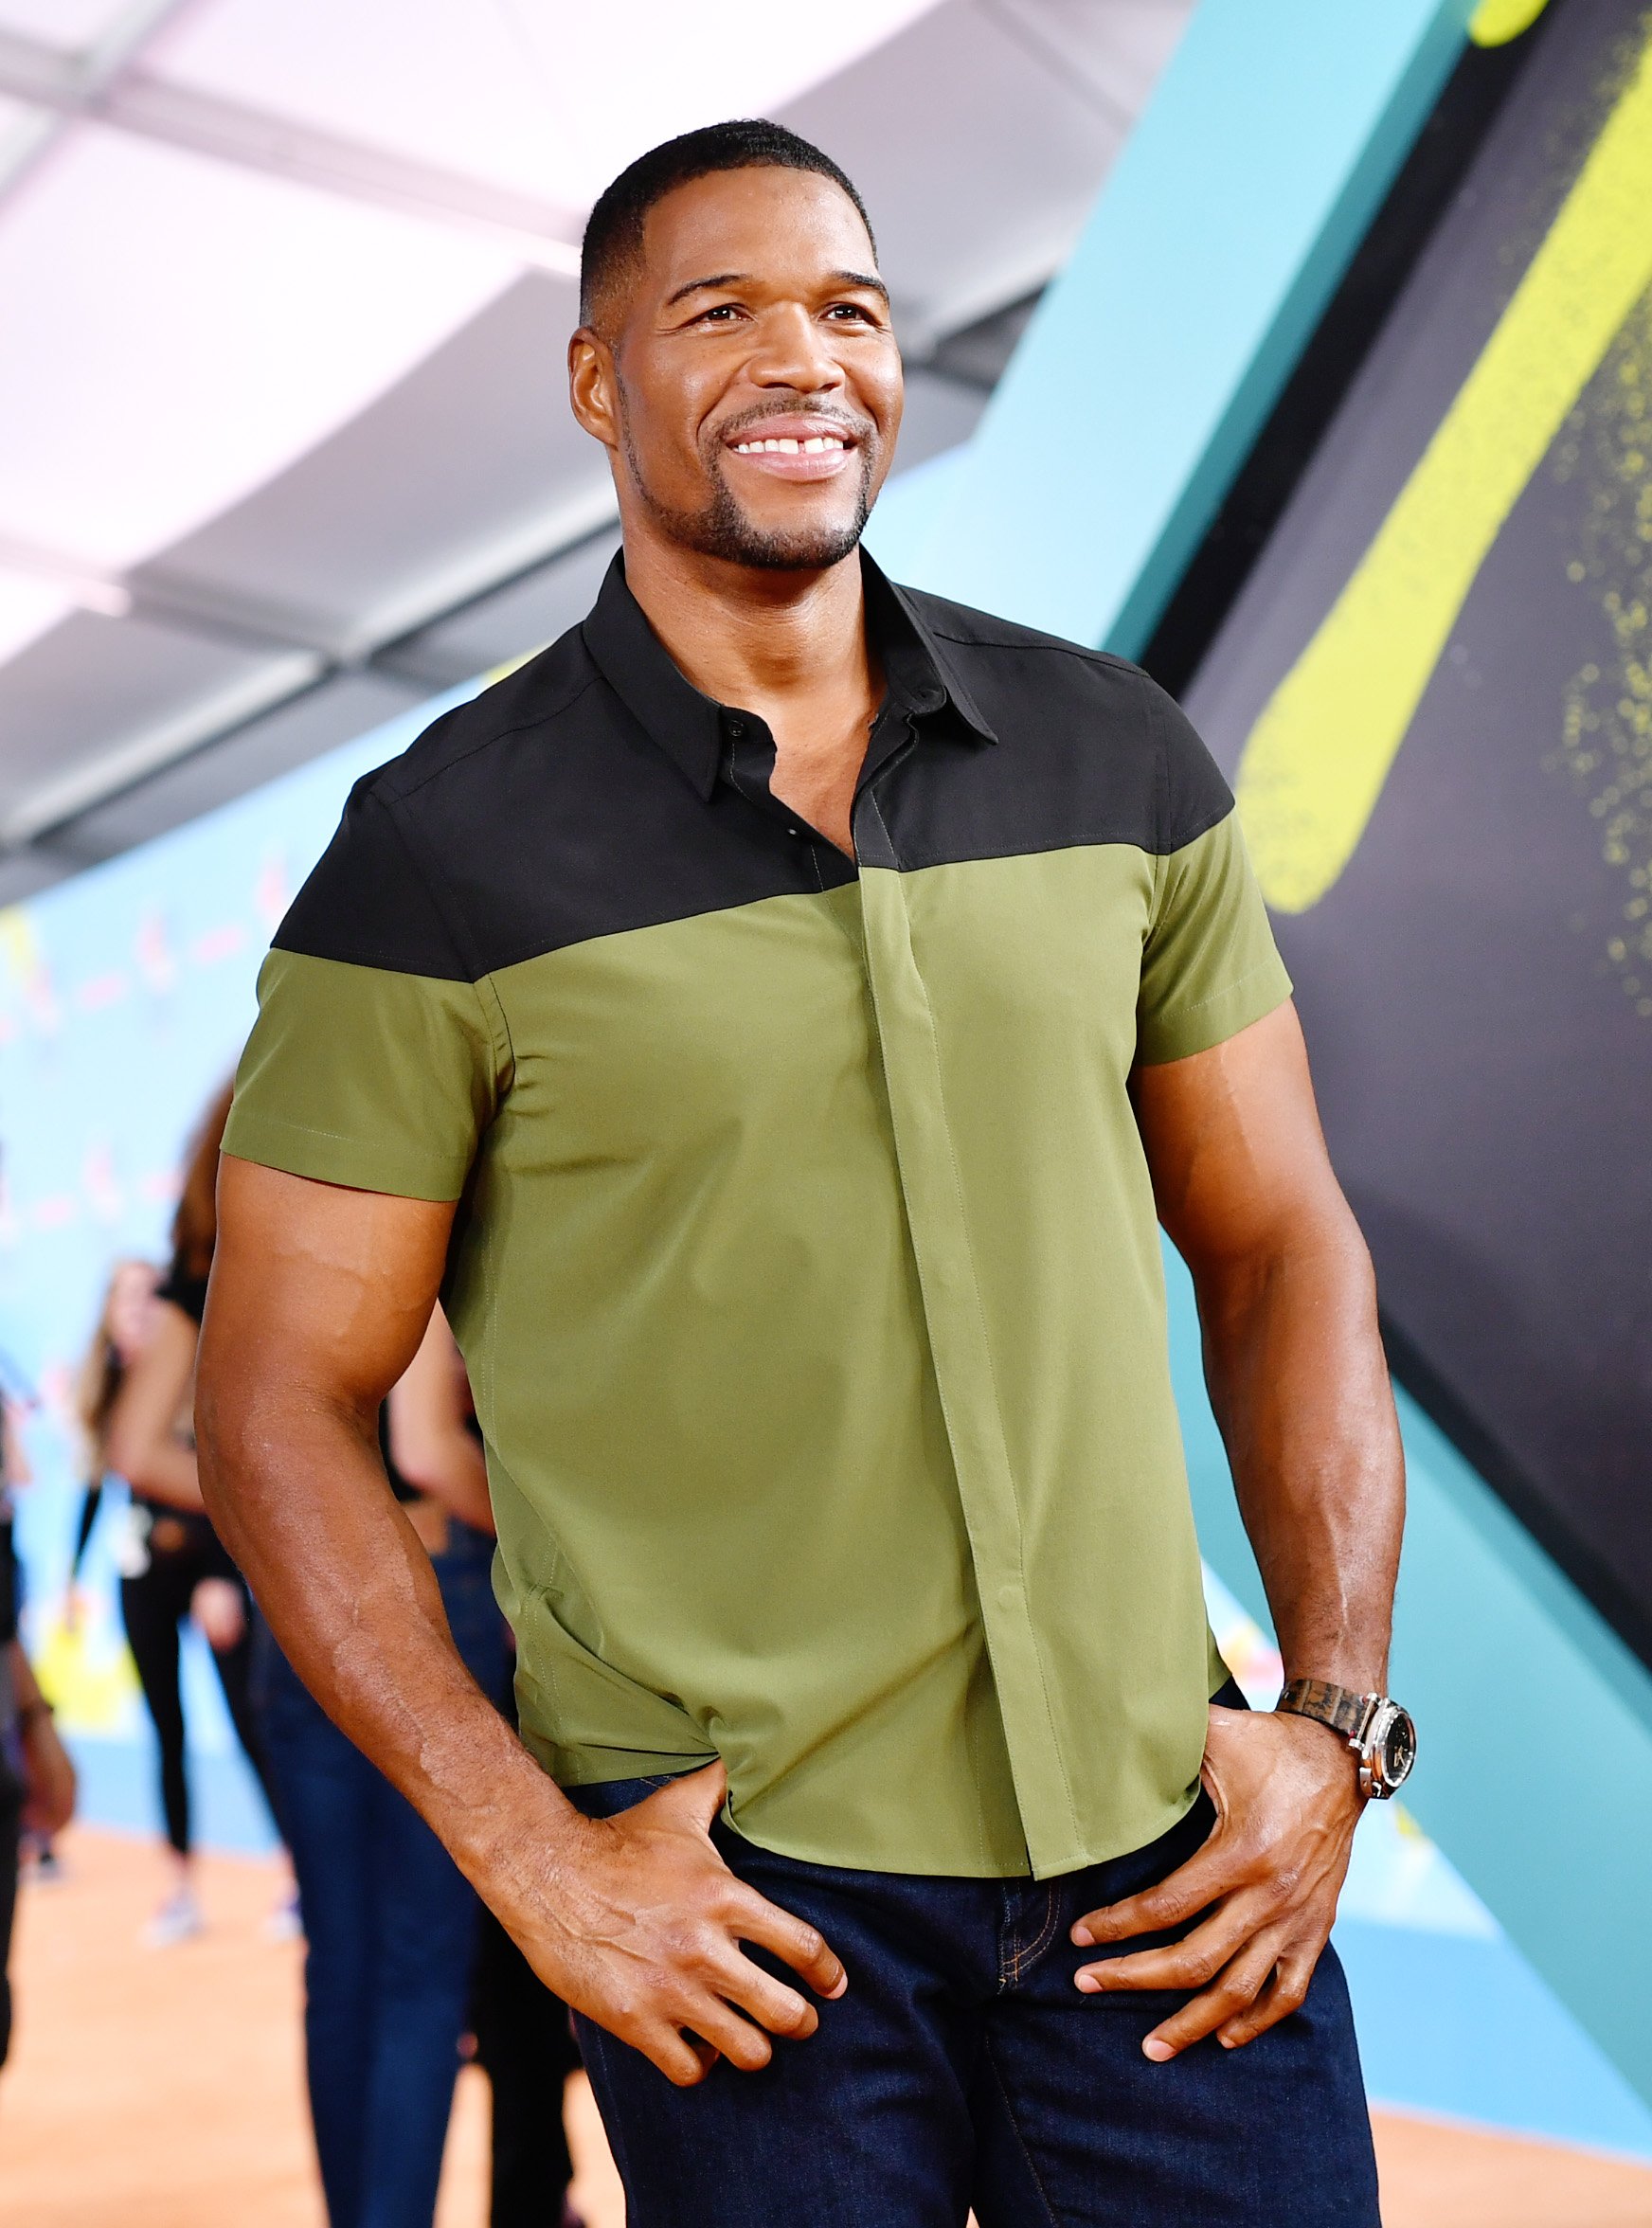 Michael Strahan attends Nickelodeon Kids' Choice Sports 2019 at Barker Hangar on July 11, 2019 in Santa Monica, California. | Photo: GettyImages